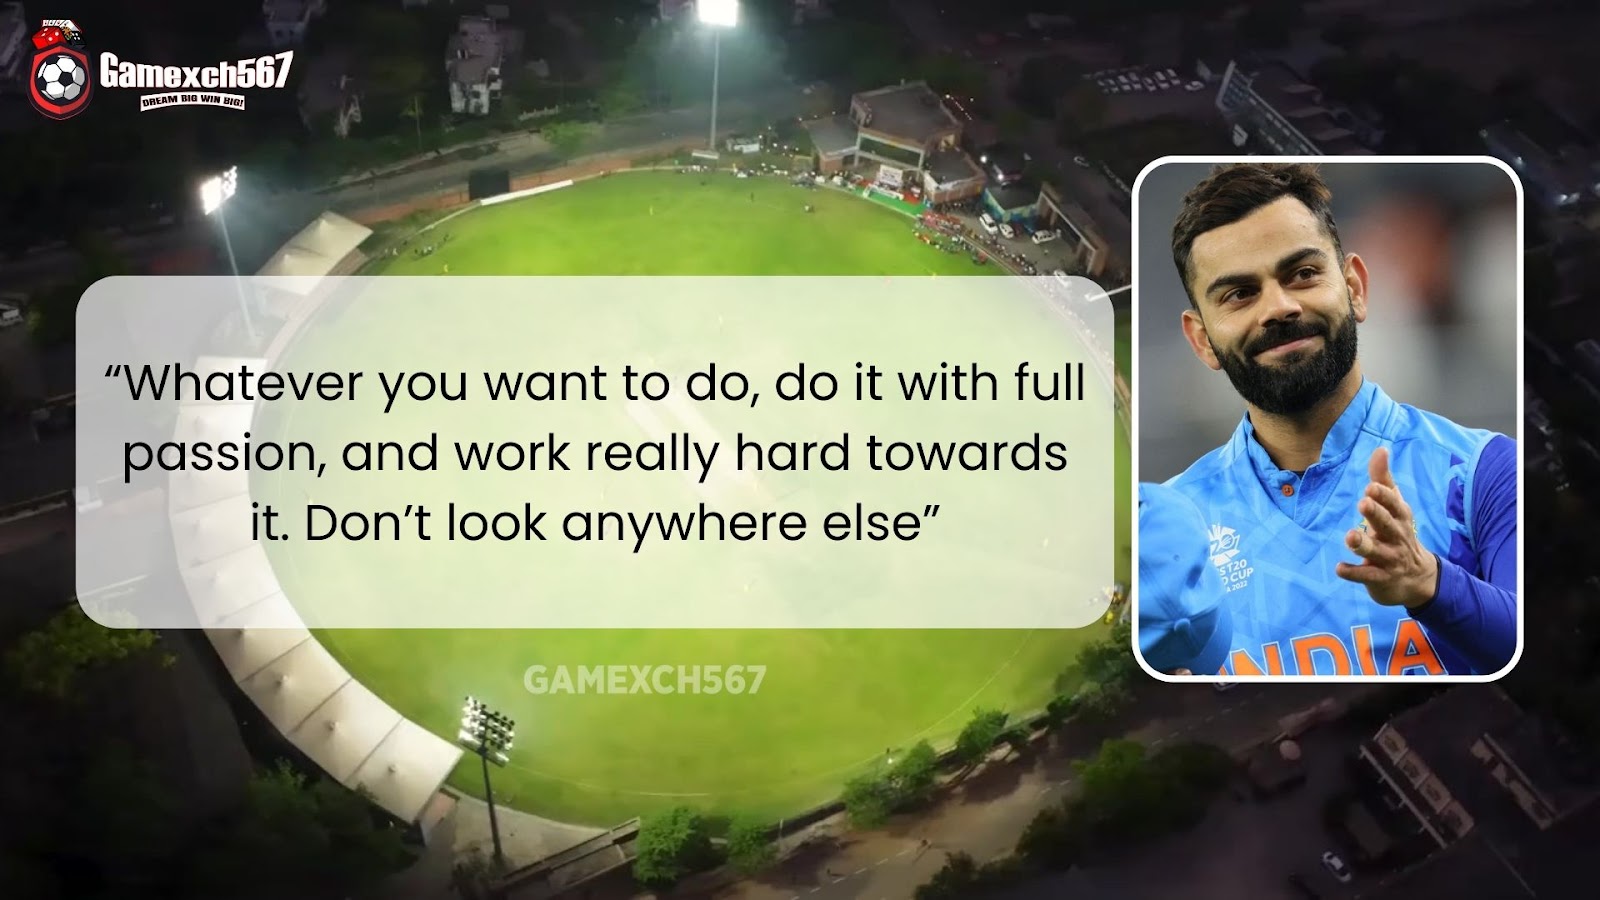 “Whatever you want to do, do it with full passion, and work really hard towards it. Don’t look anywhere else” - Quote of Virat Kohli